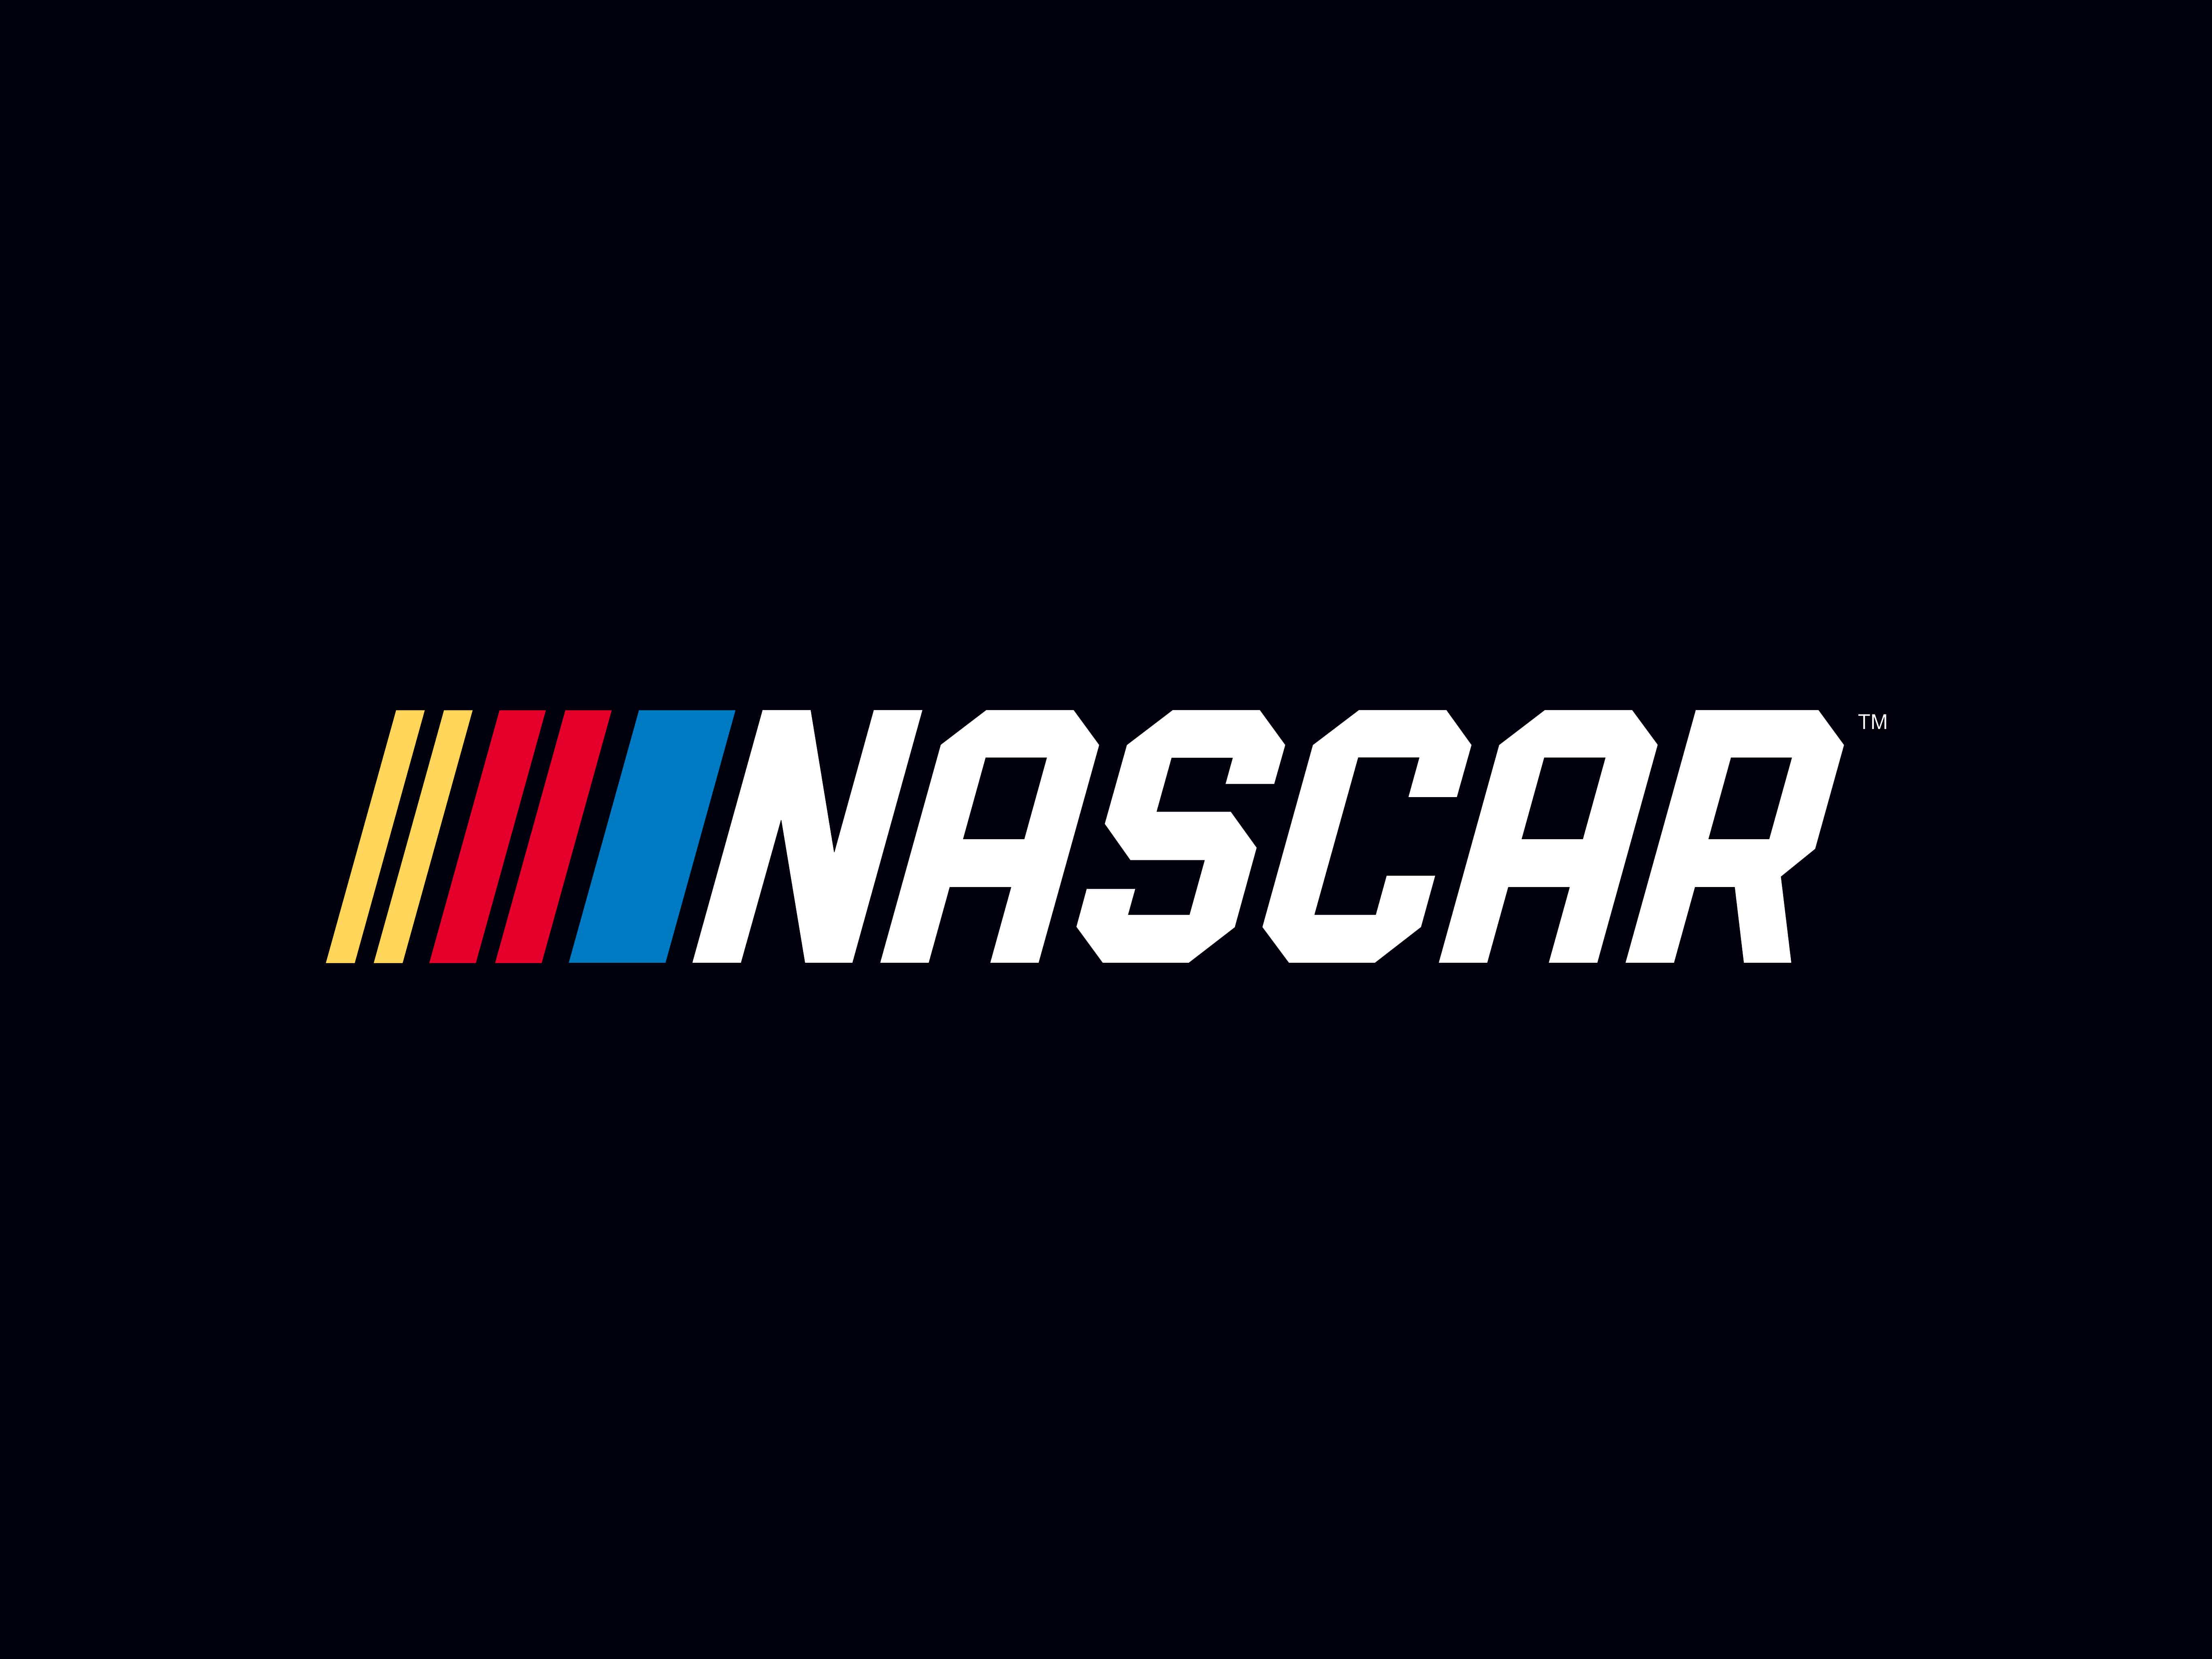 Check out our full review. Source: Nascar.